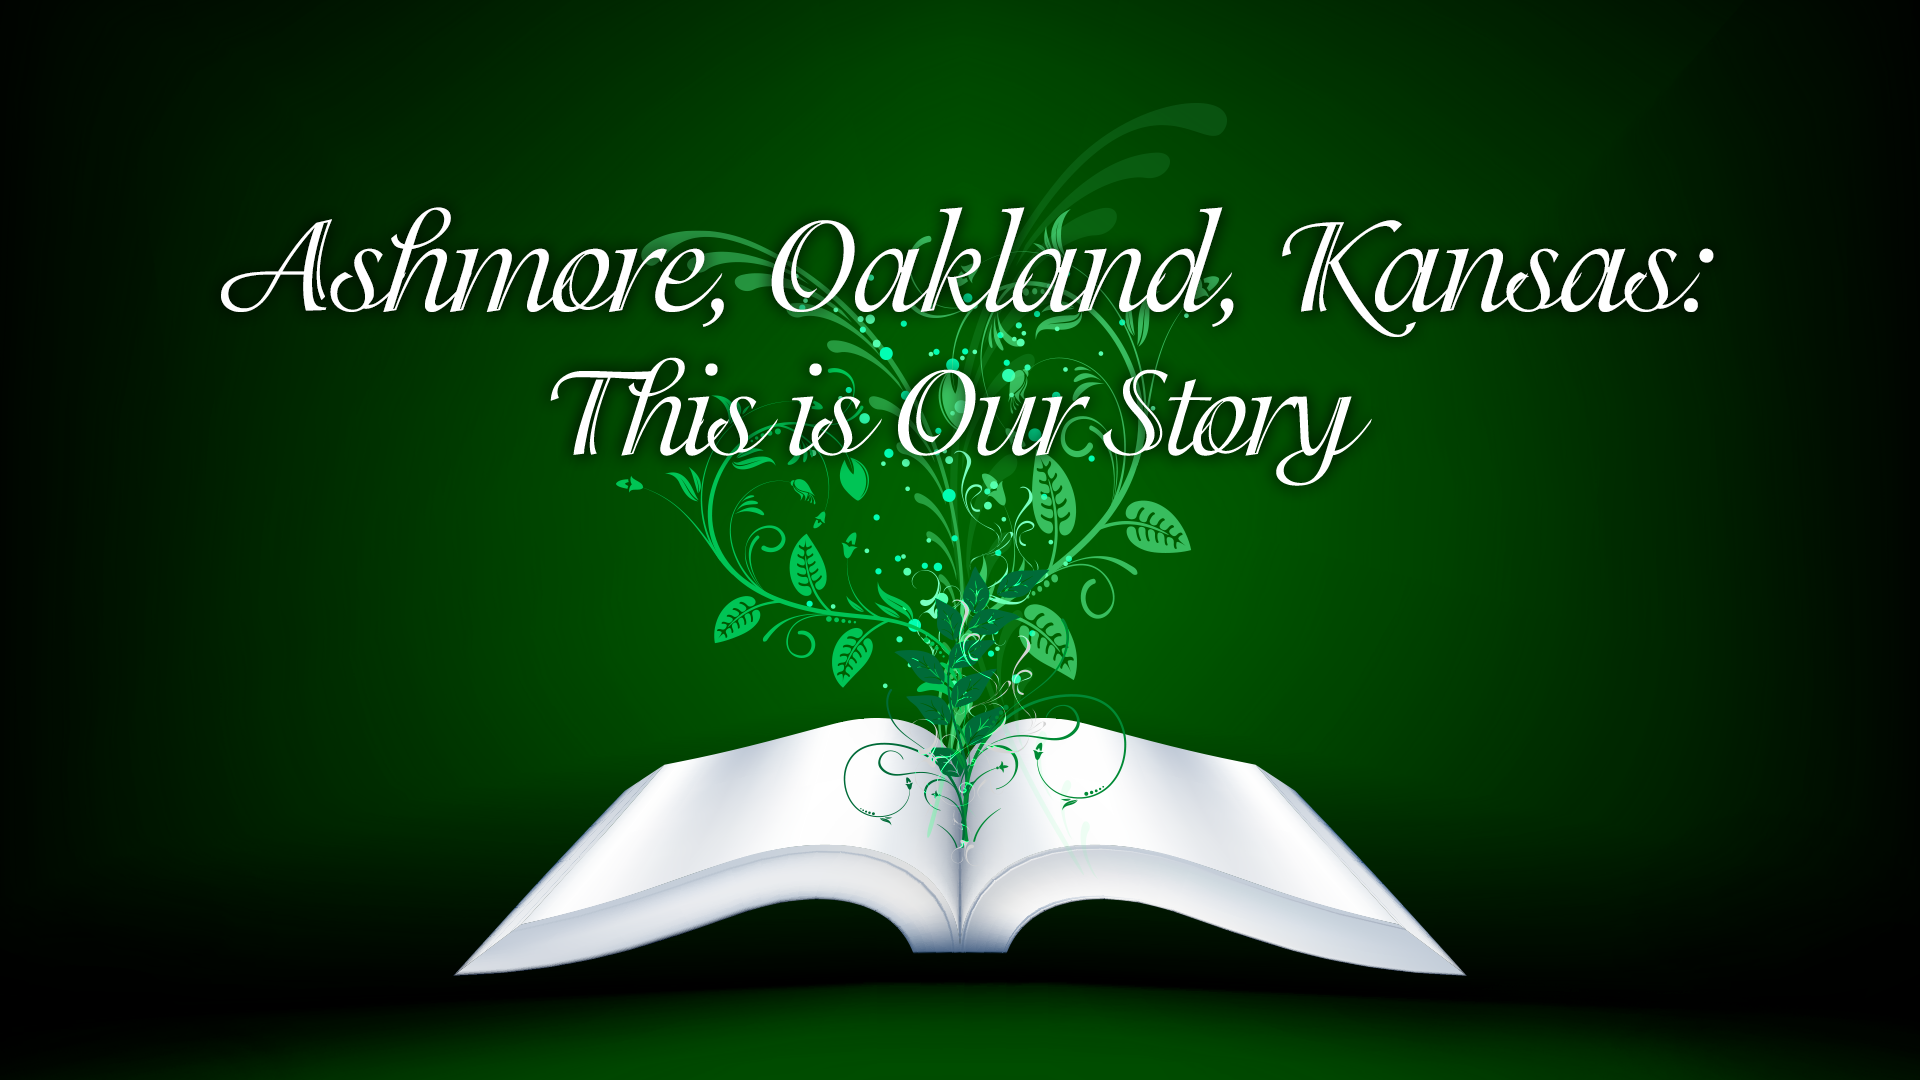 This is Our Story: Ashmore, Oakland, Kansas